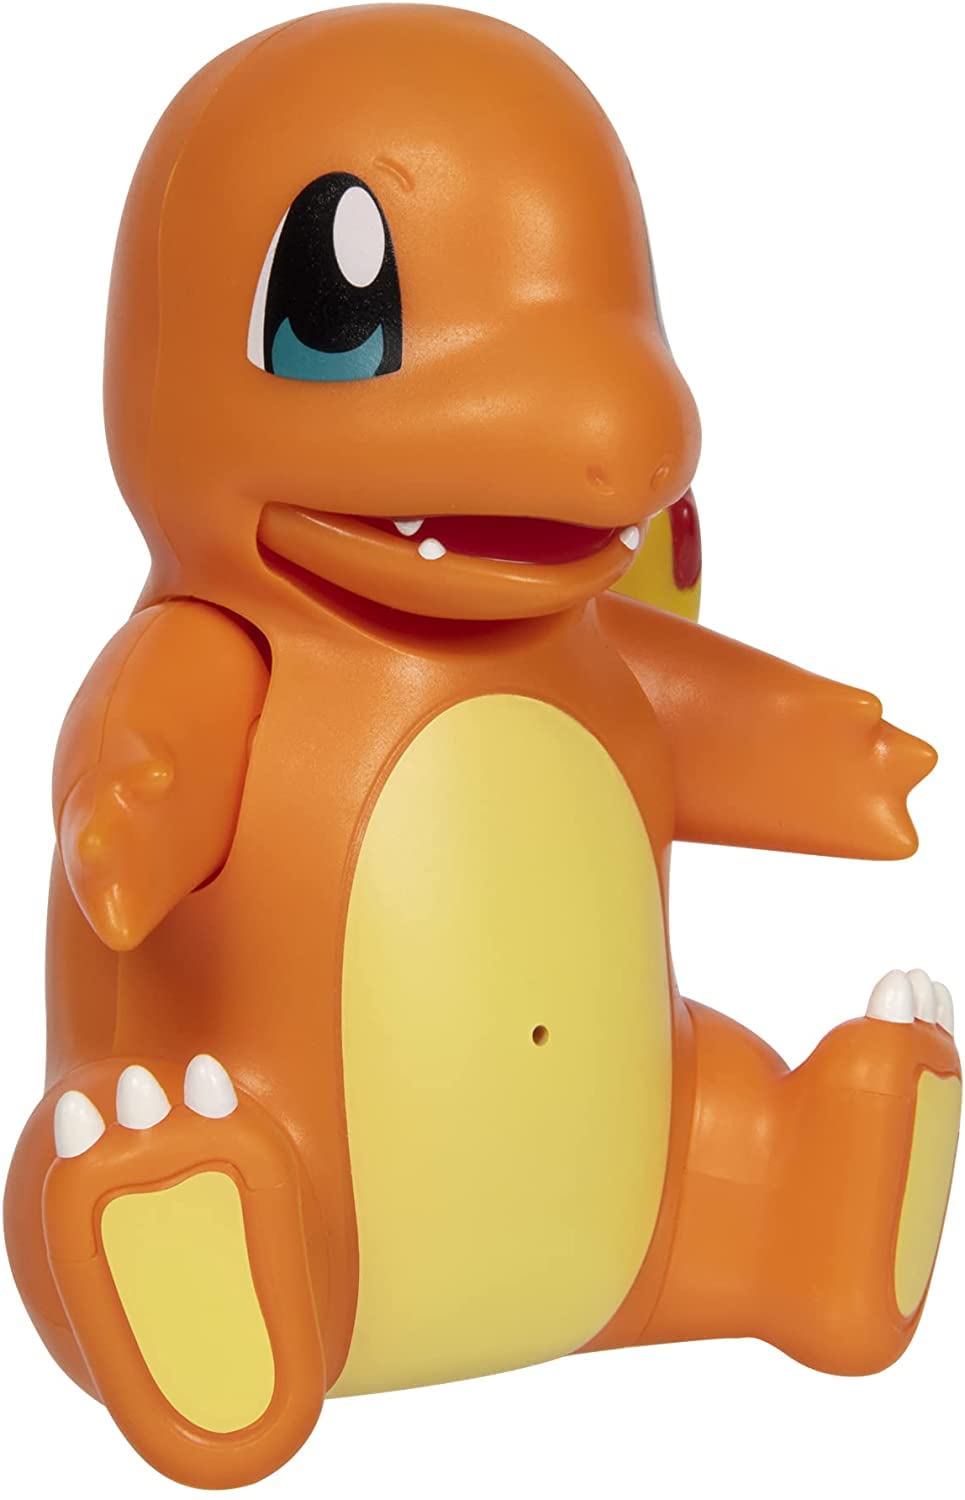 Pokemon Electronic & Interactive My Partner Charmander- Reacts to Touch & Sound, Over 50 Different Interactions with Movement and Sound - Dances, Moves & Speaks - Gotta Catch 